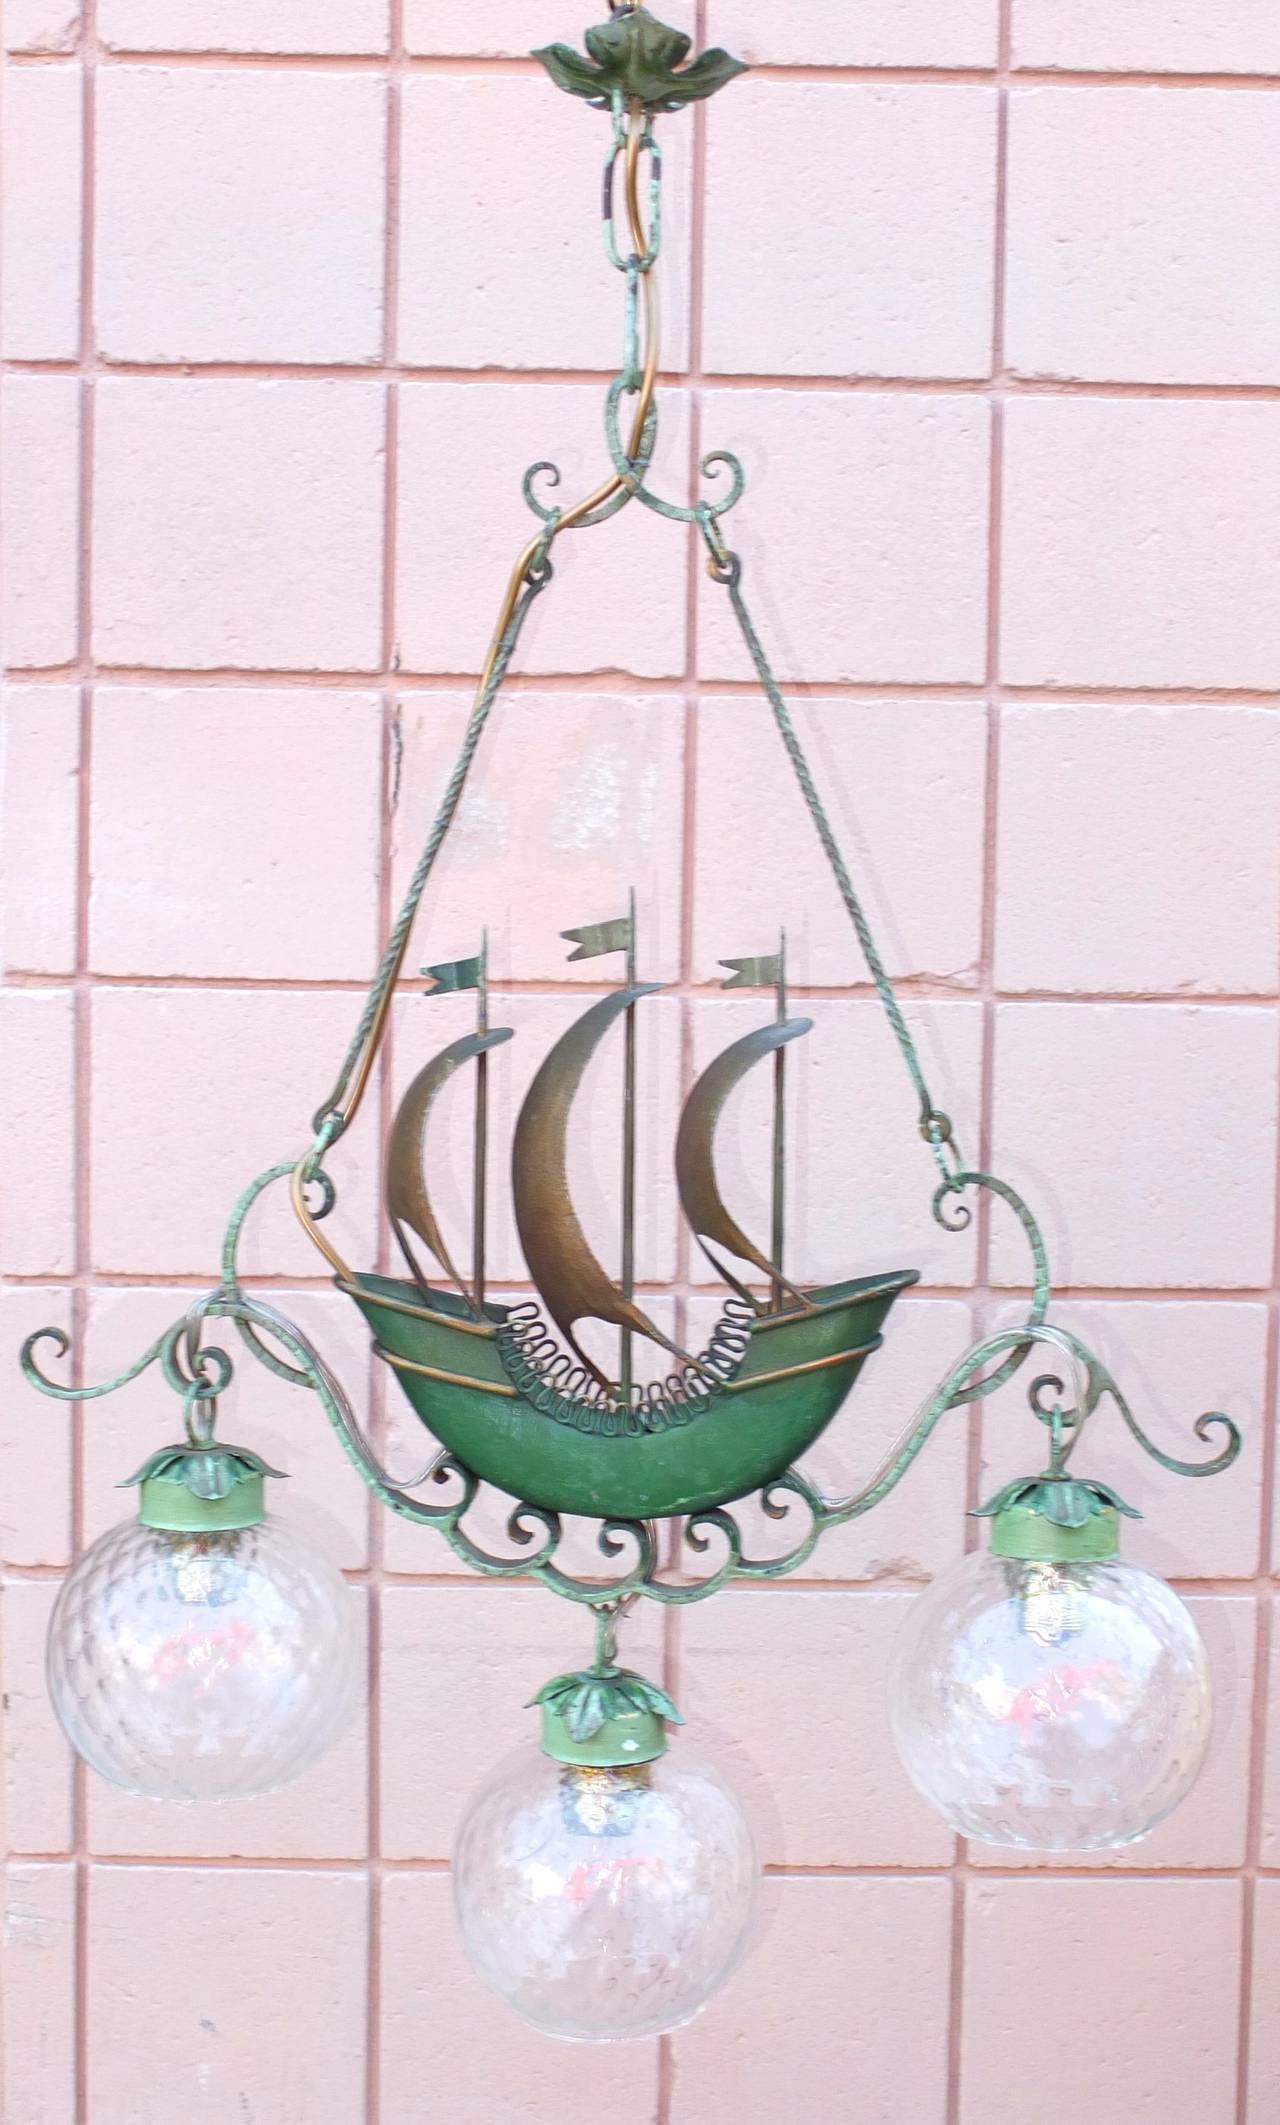 Lovely vintage 1940's Italian chandelier with original green painted tole and wrought iron framing a model of an 18th century three masted merchant ship.

Three glass globes each hold one standard size Edison screw cap bulb.

If desired for